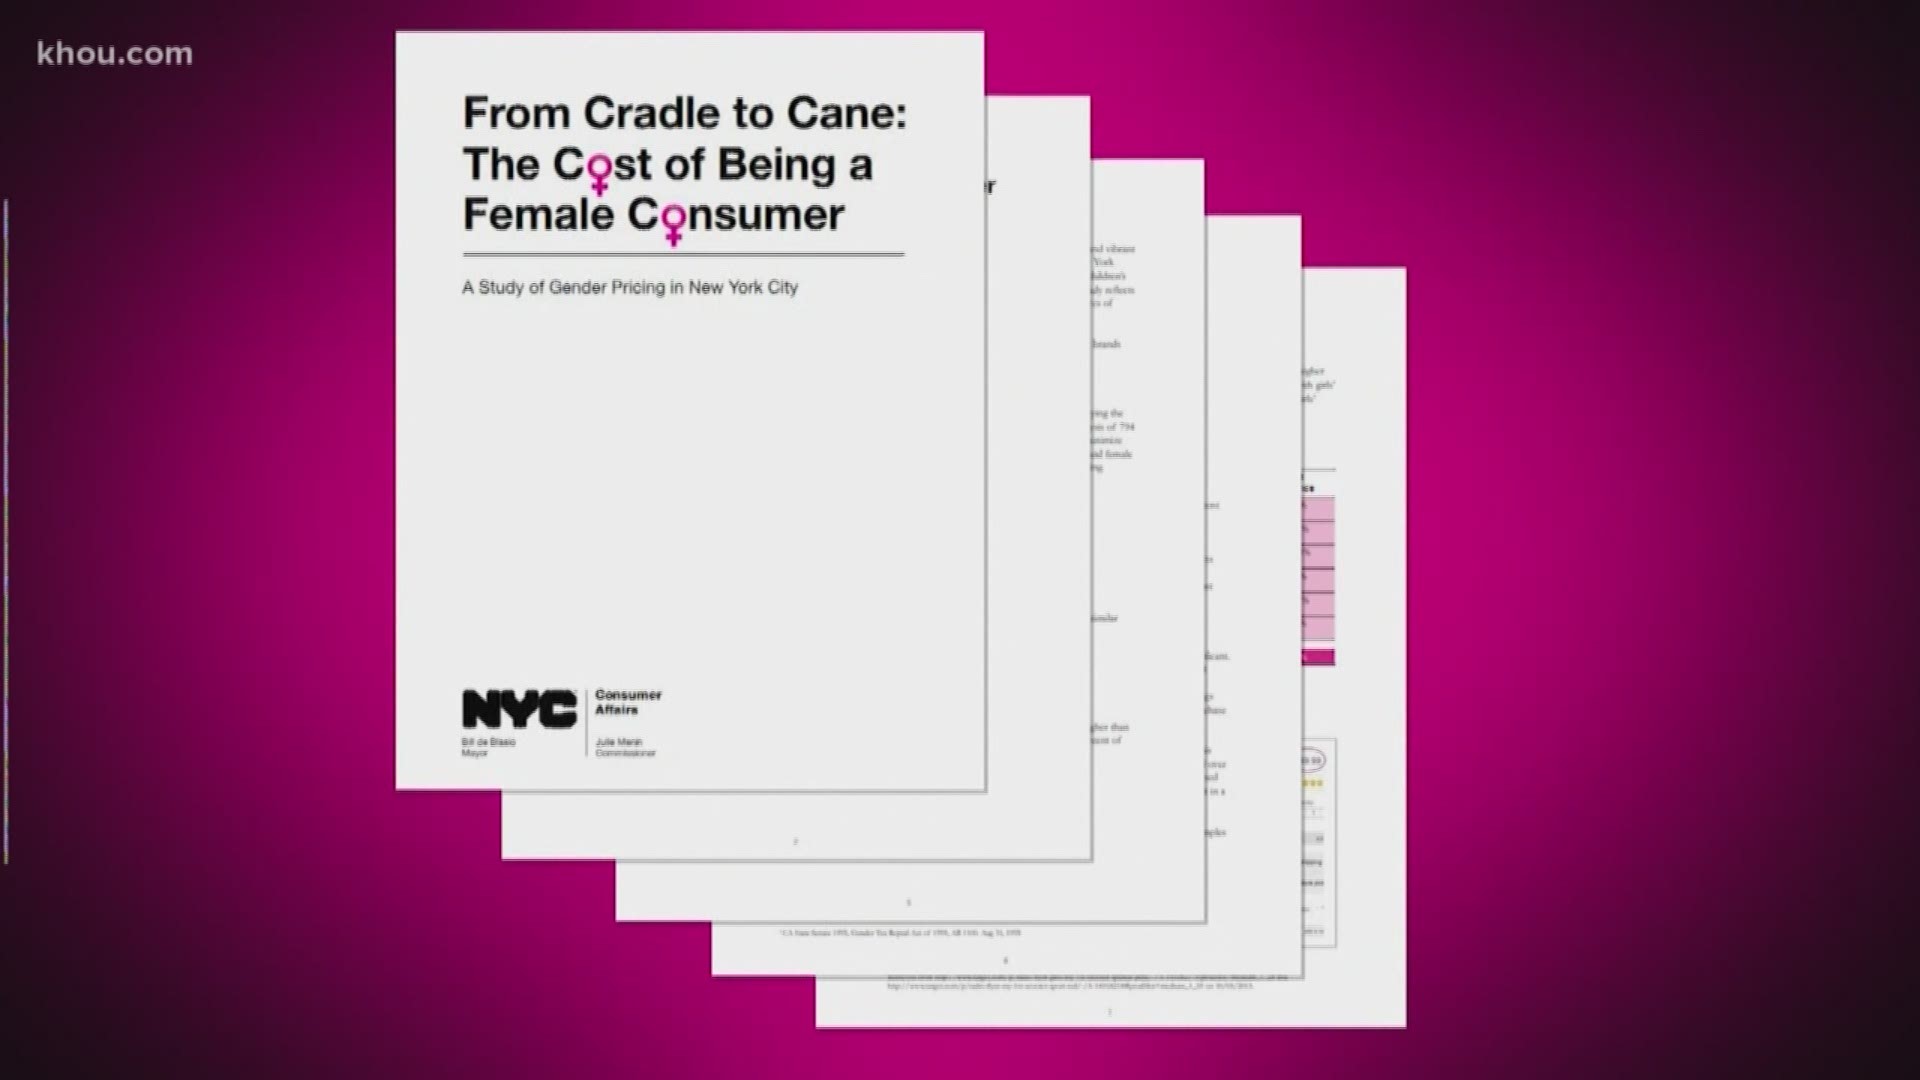 Researchers in New York found women products cost seven percent more than men products. So what's costing so much?